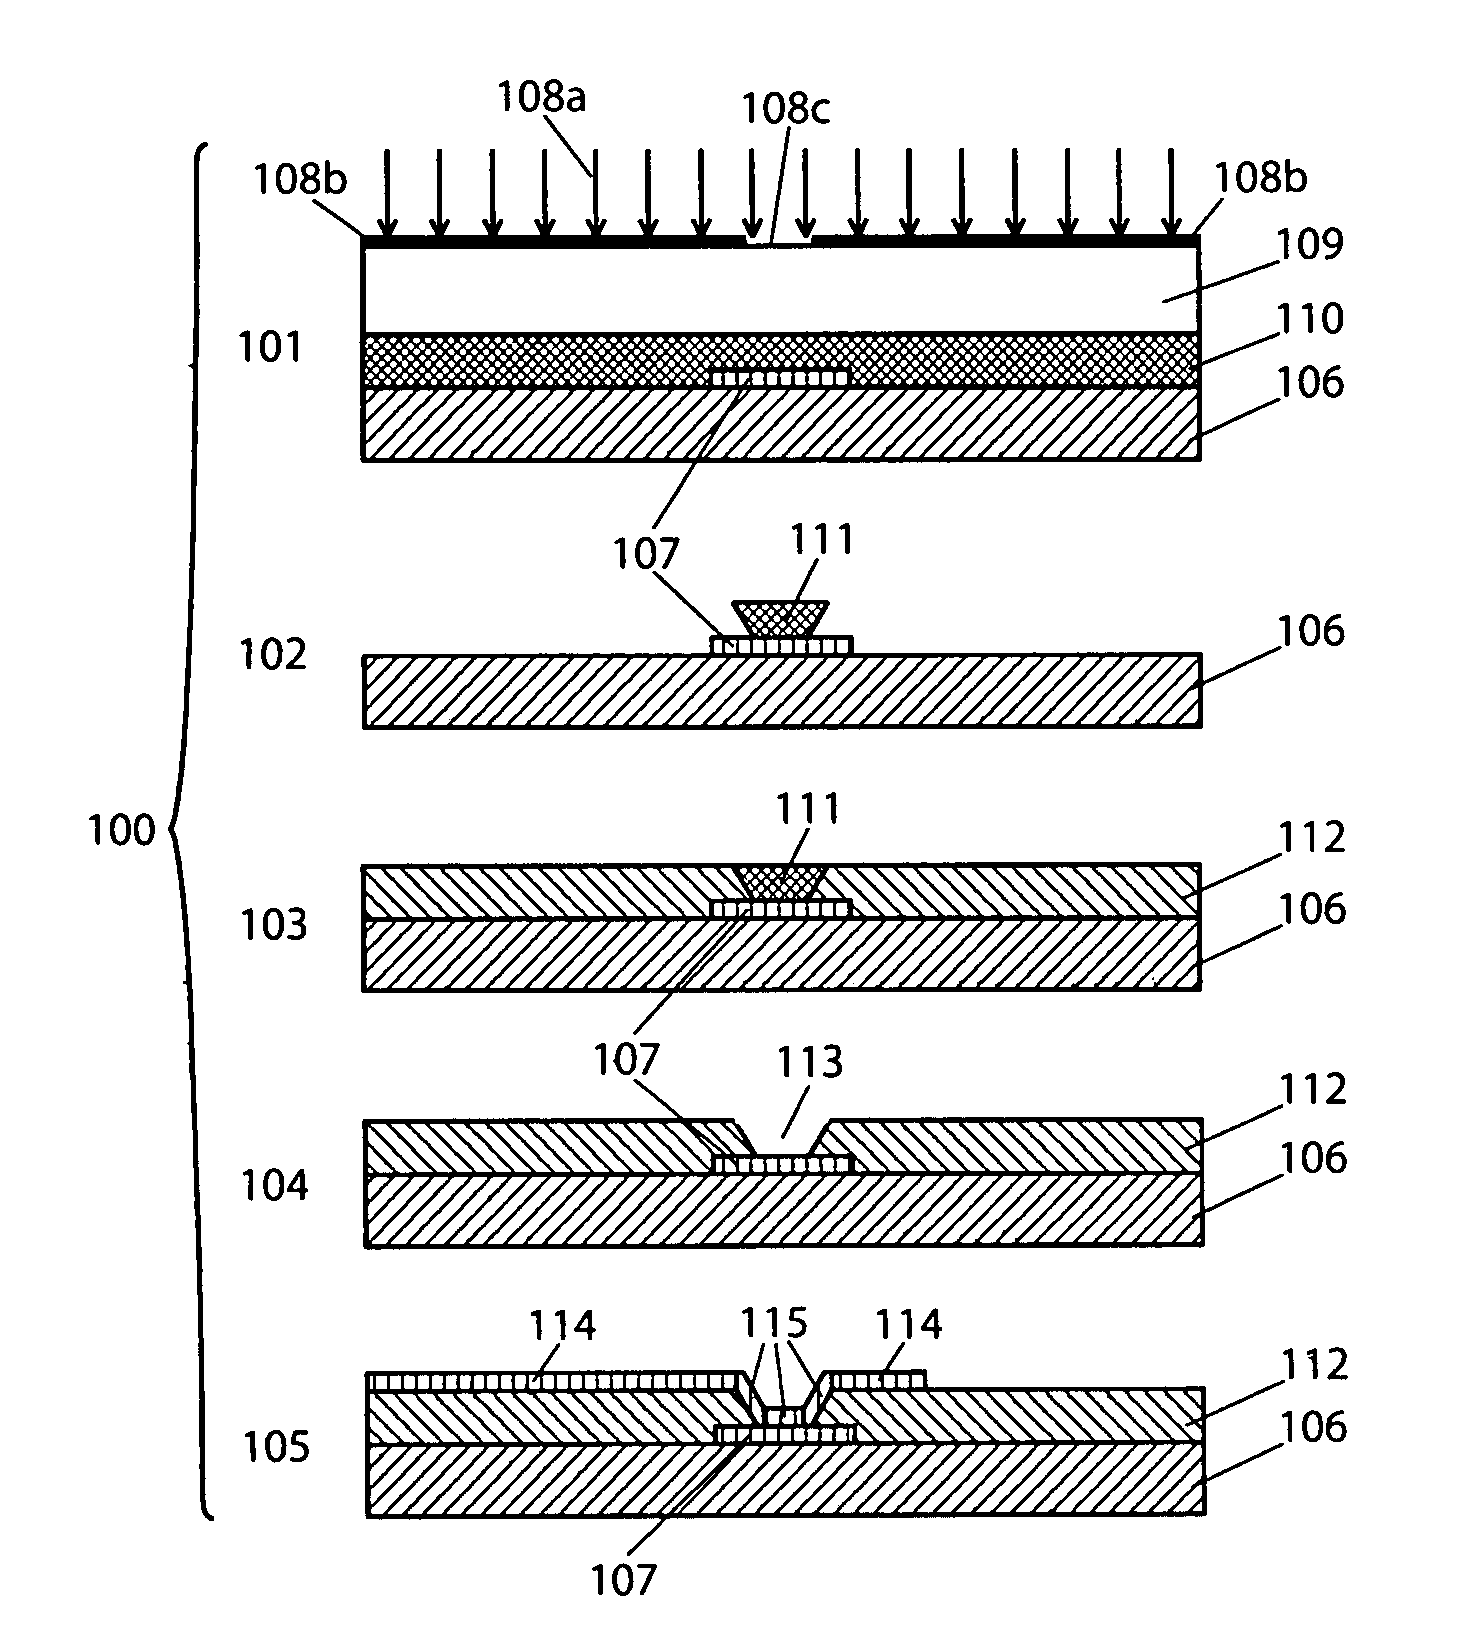 Integrated Method for High-Density Interconnection of Electronic Components through Stretchable Interconnects